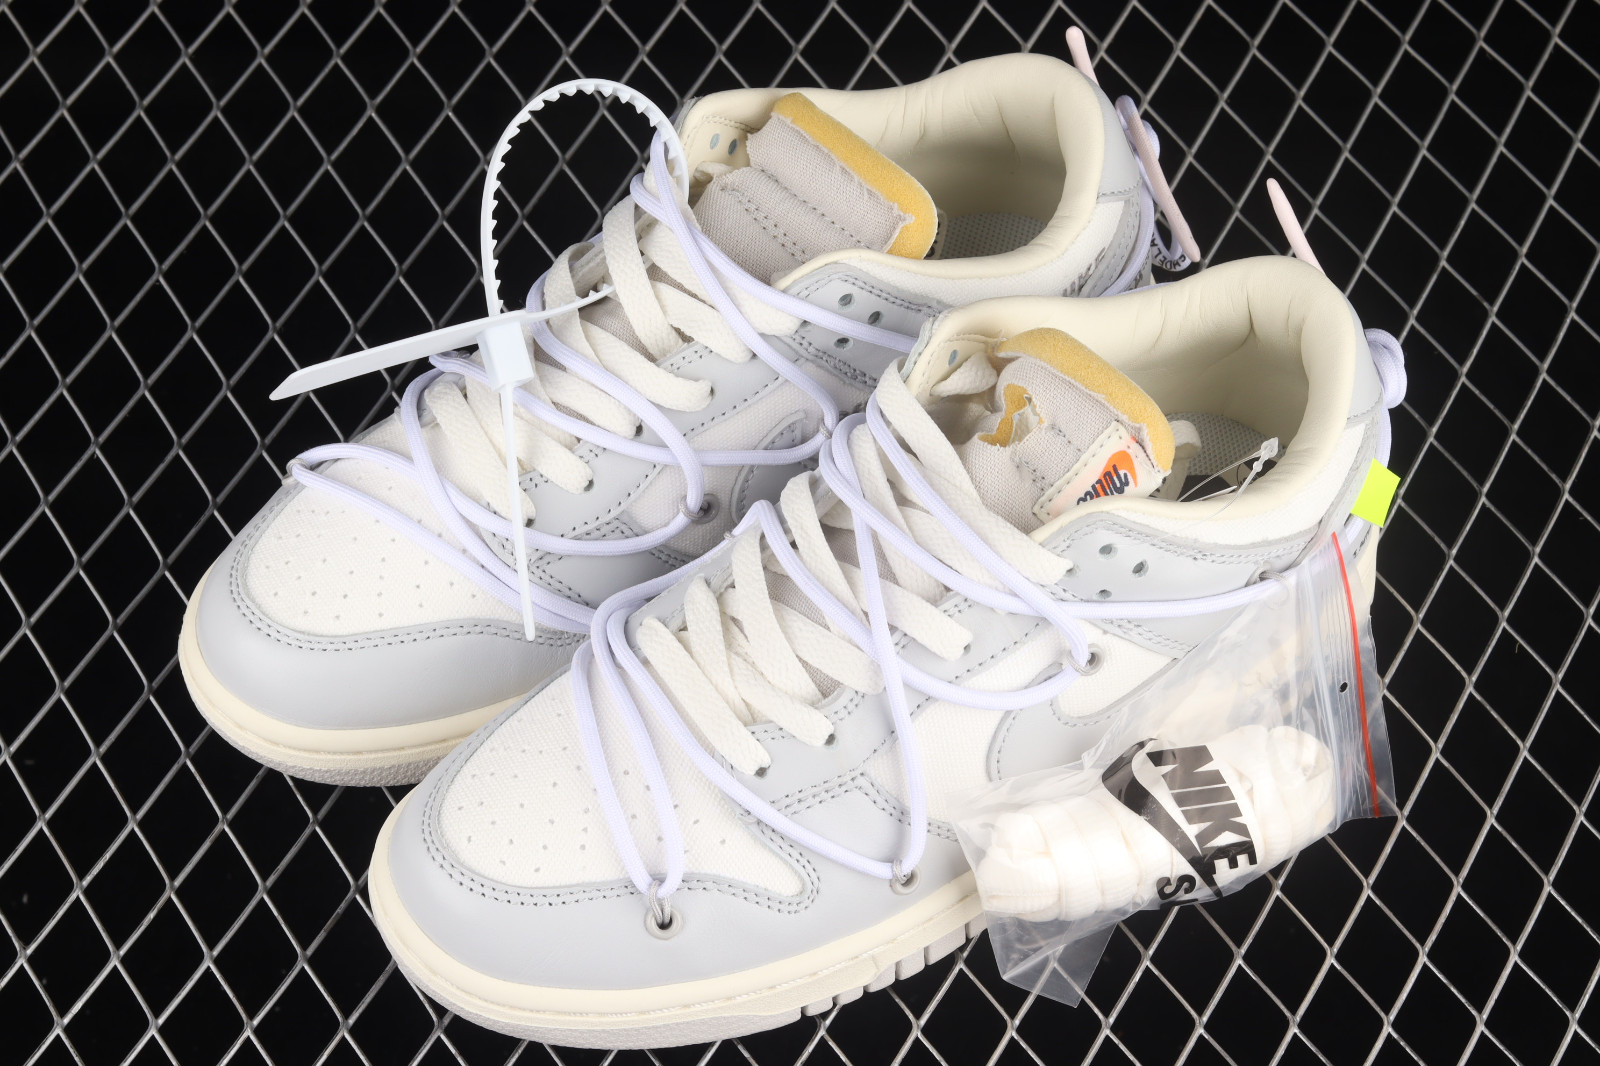 Nike Dunk off White lot 38. Nike Dunk off White Grey. Nike Dunk off White. Nike Dunk Low off White. White a lot